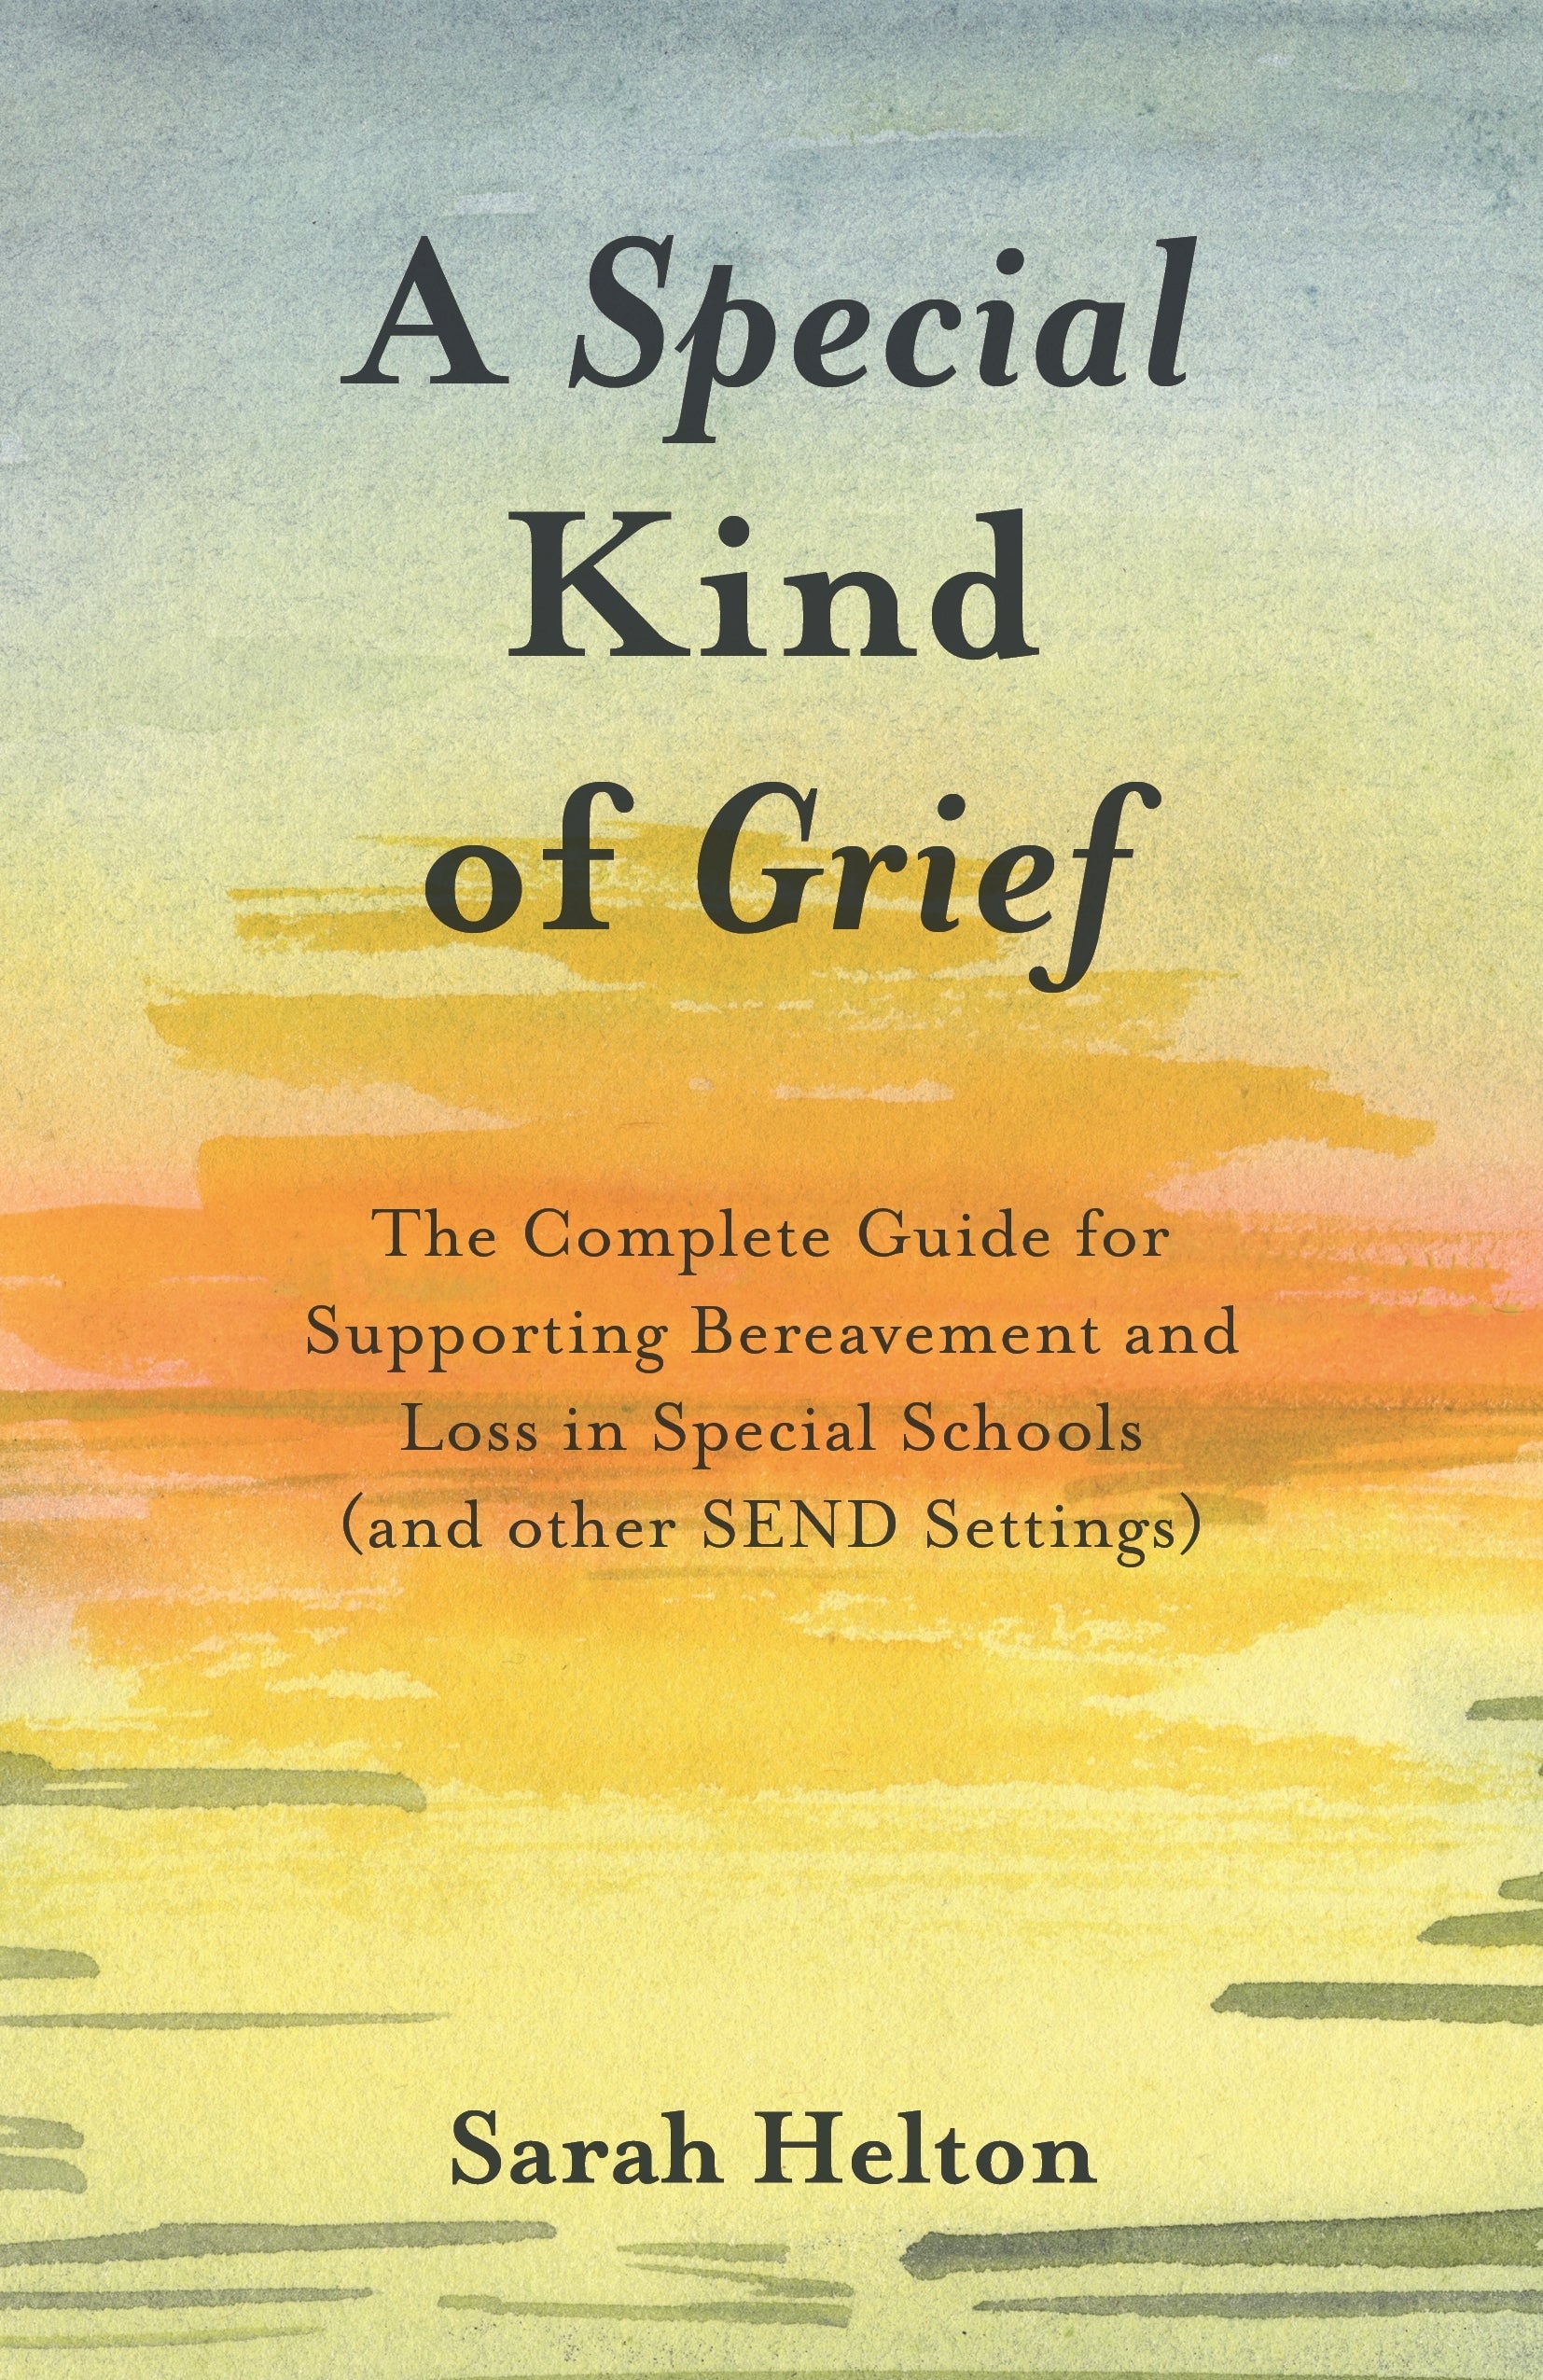 A Special Kind of Grief by Sarah Helton